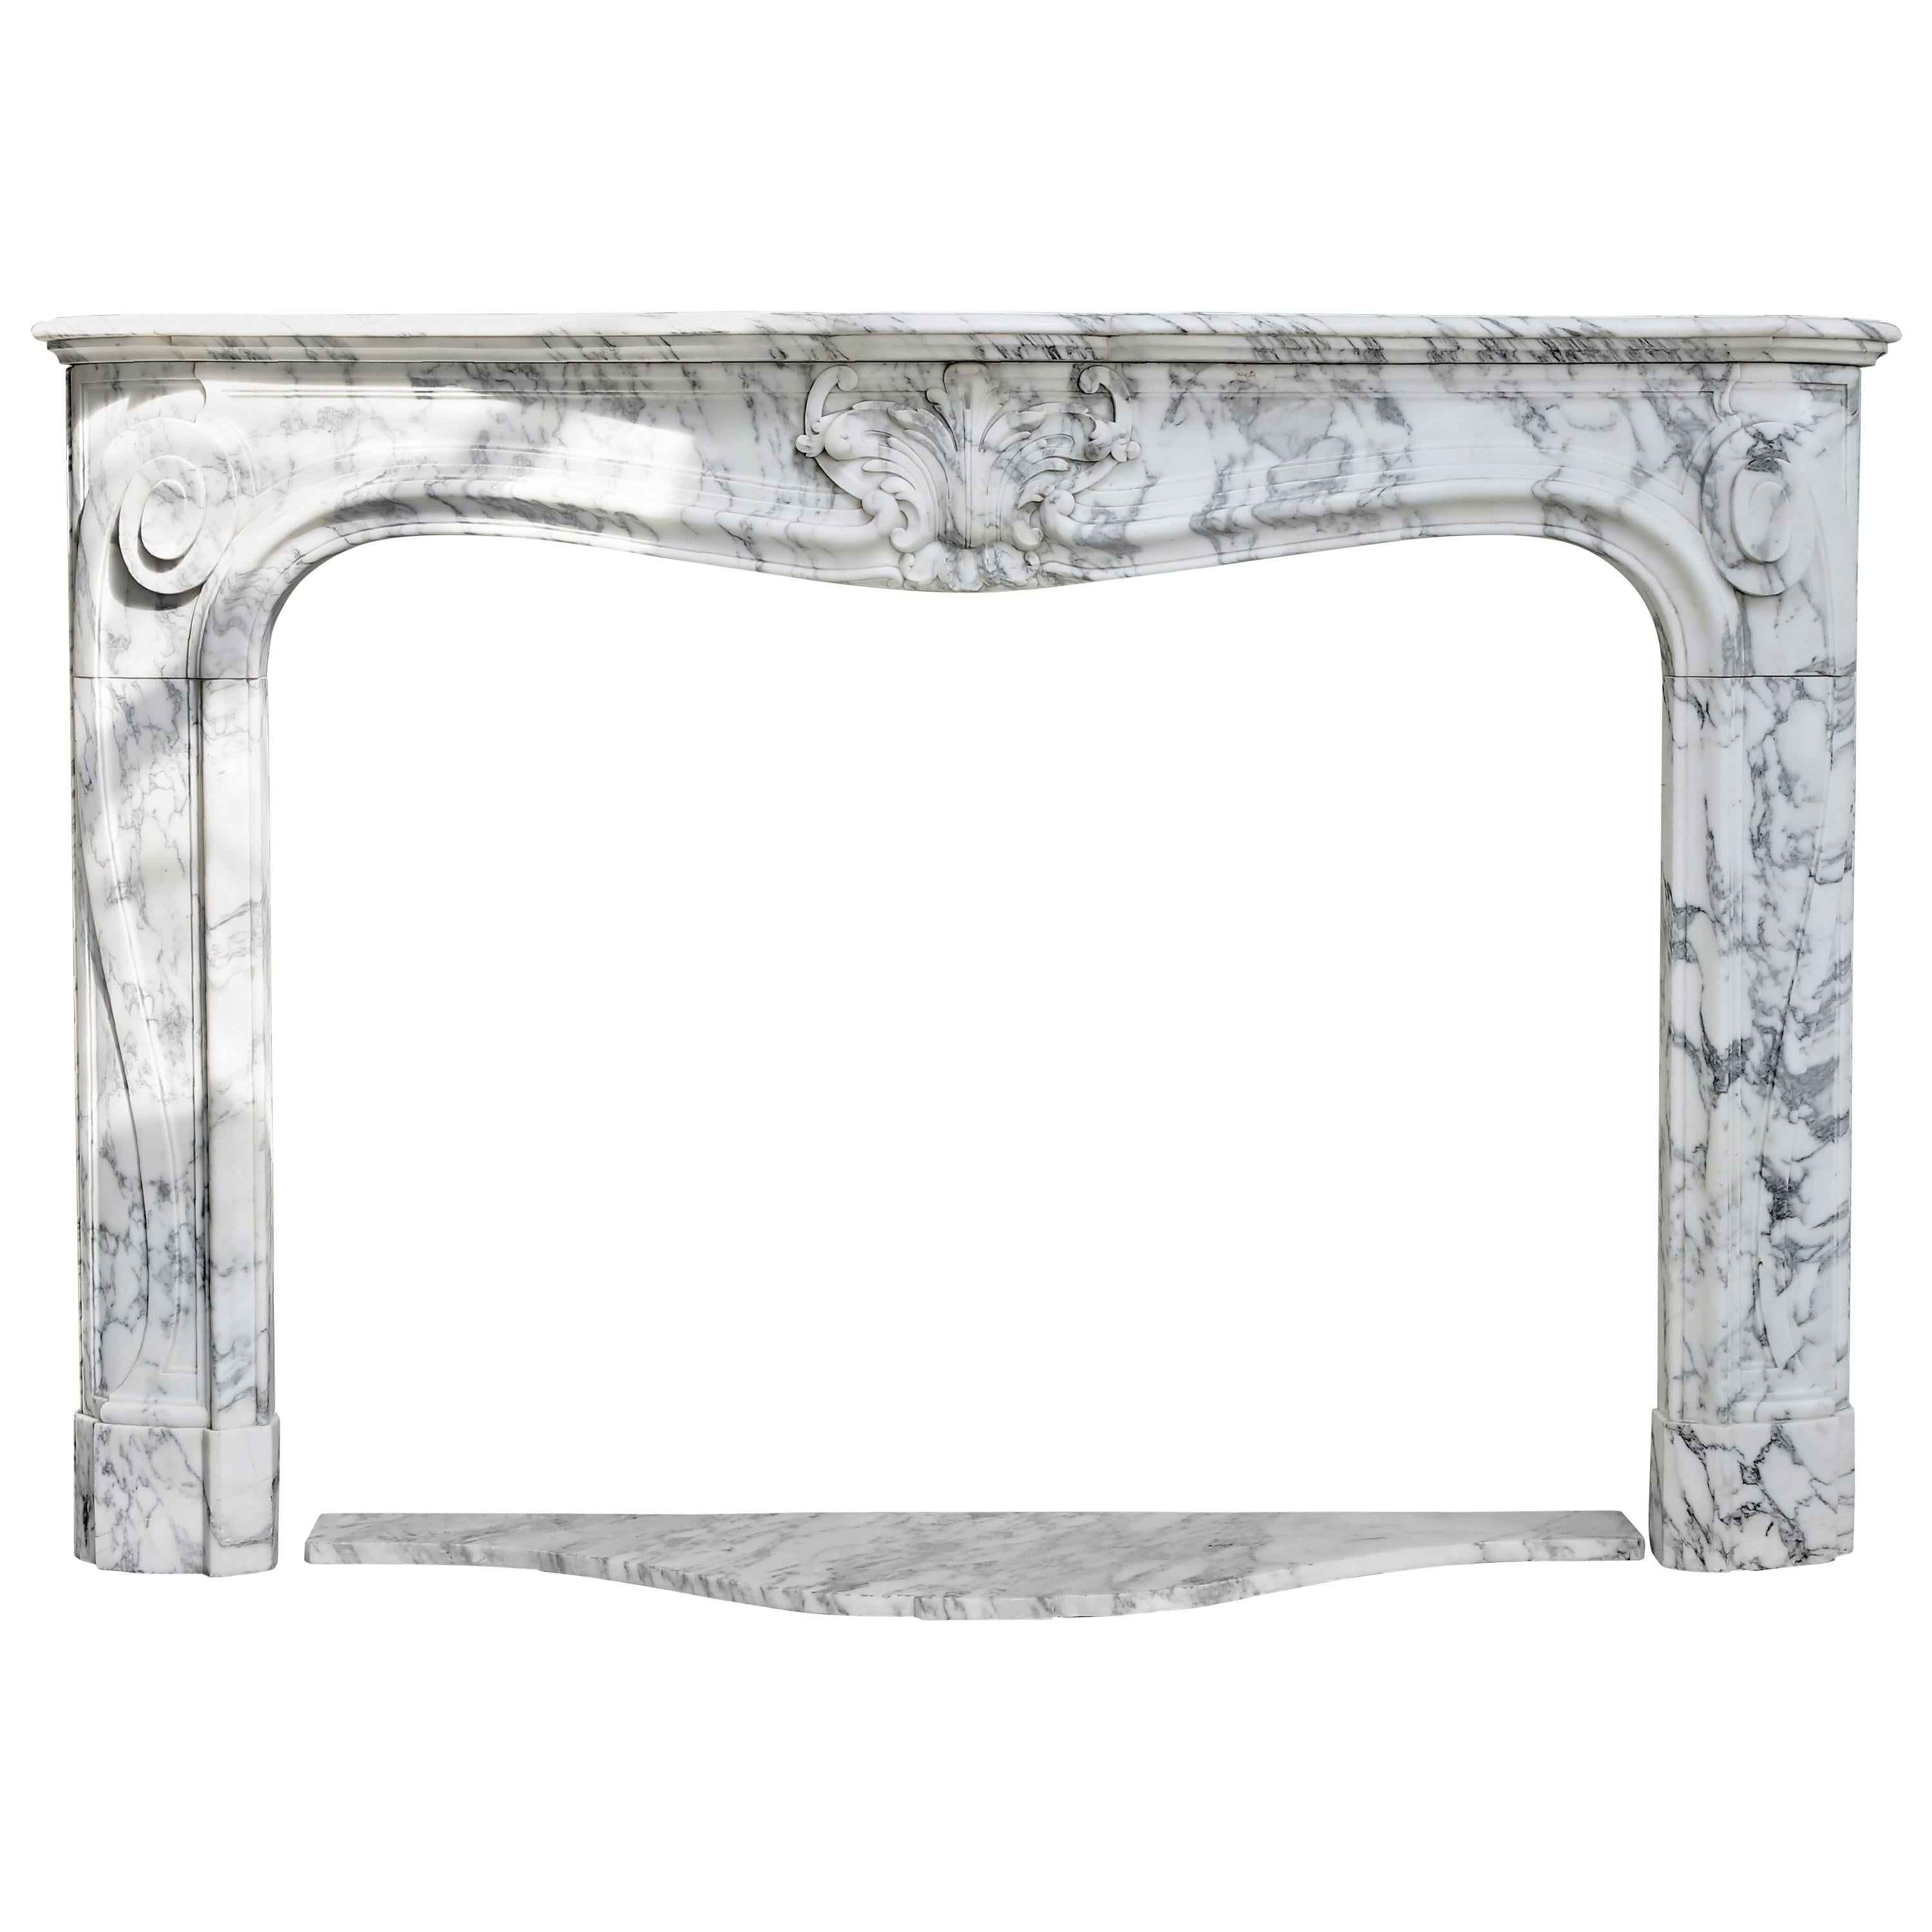 Antique Marble Fireplace of Arabescato Marble, Louis XV